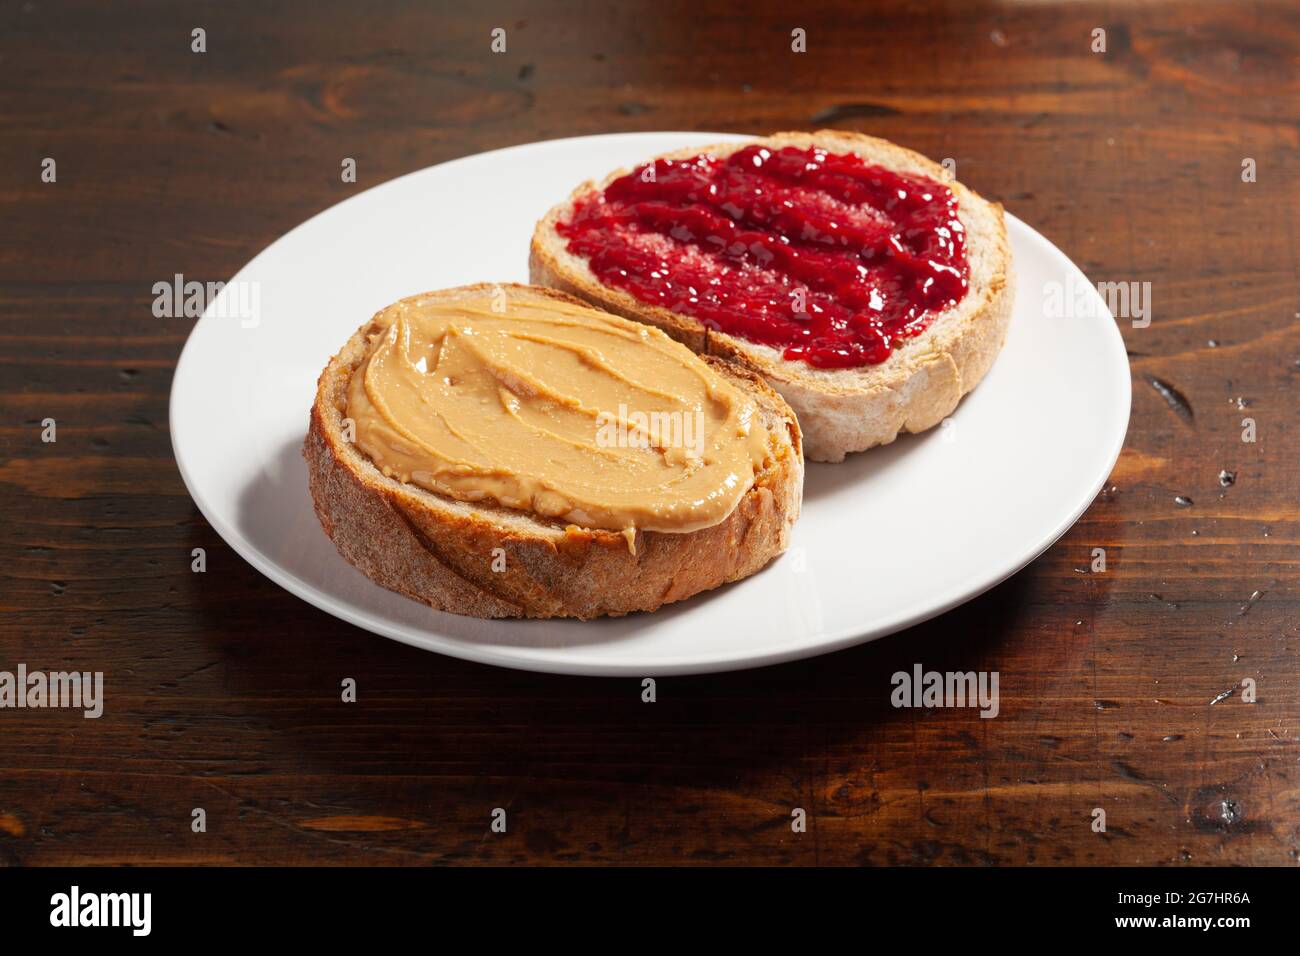 smooth peanut butter on a knife Stock Photo - Alamy